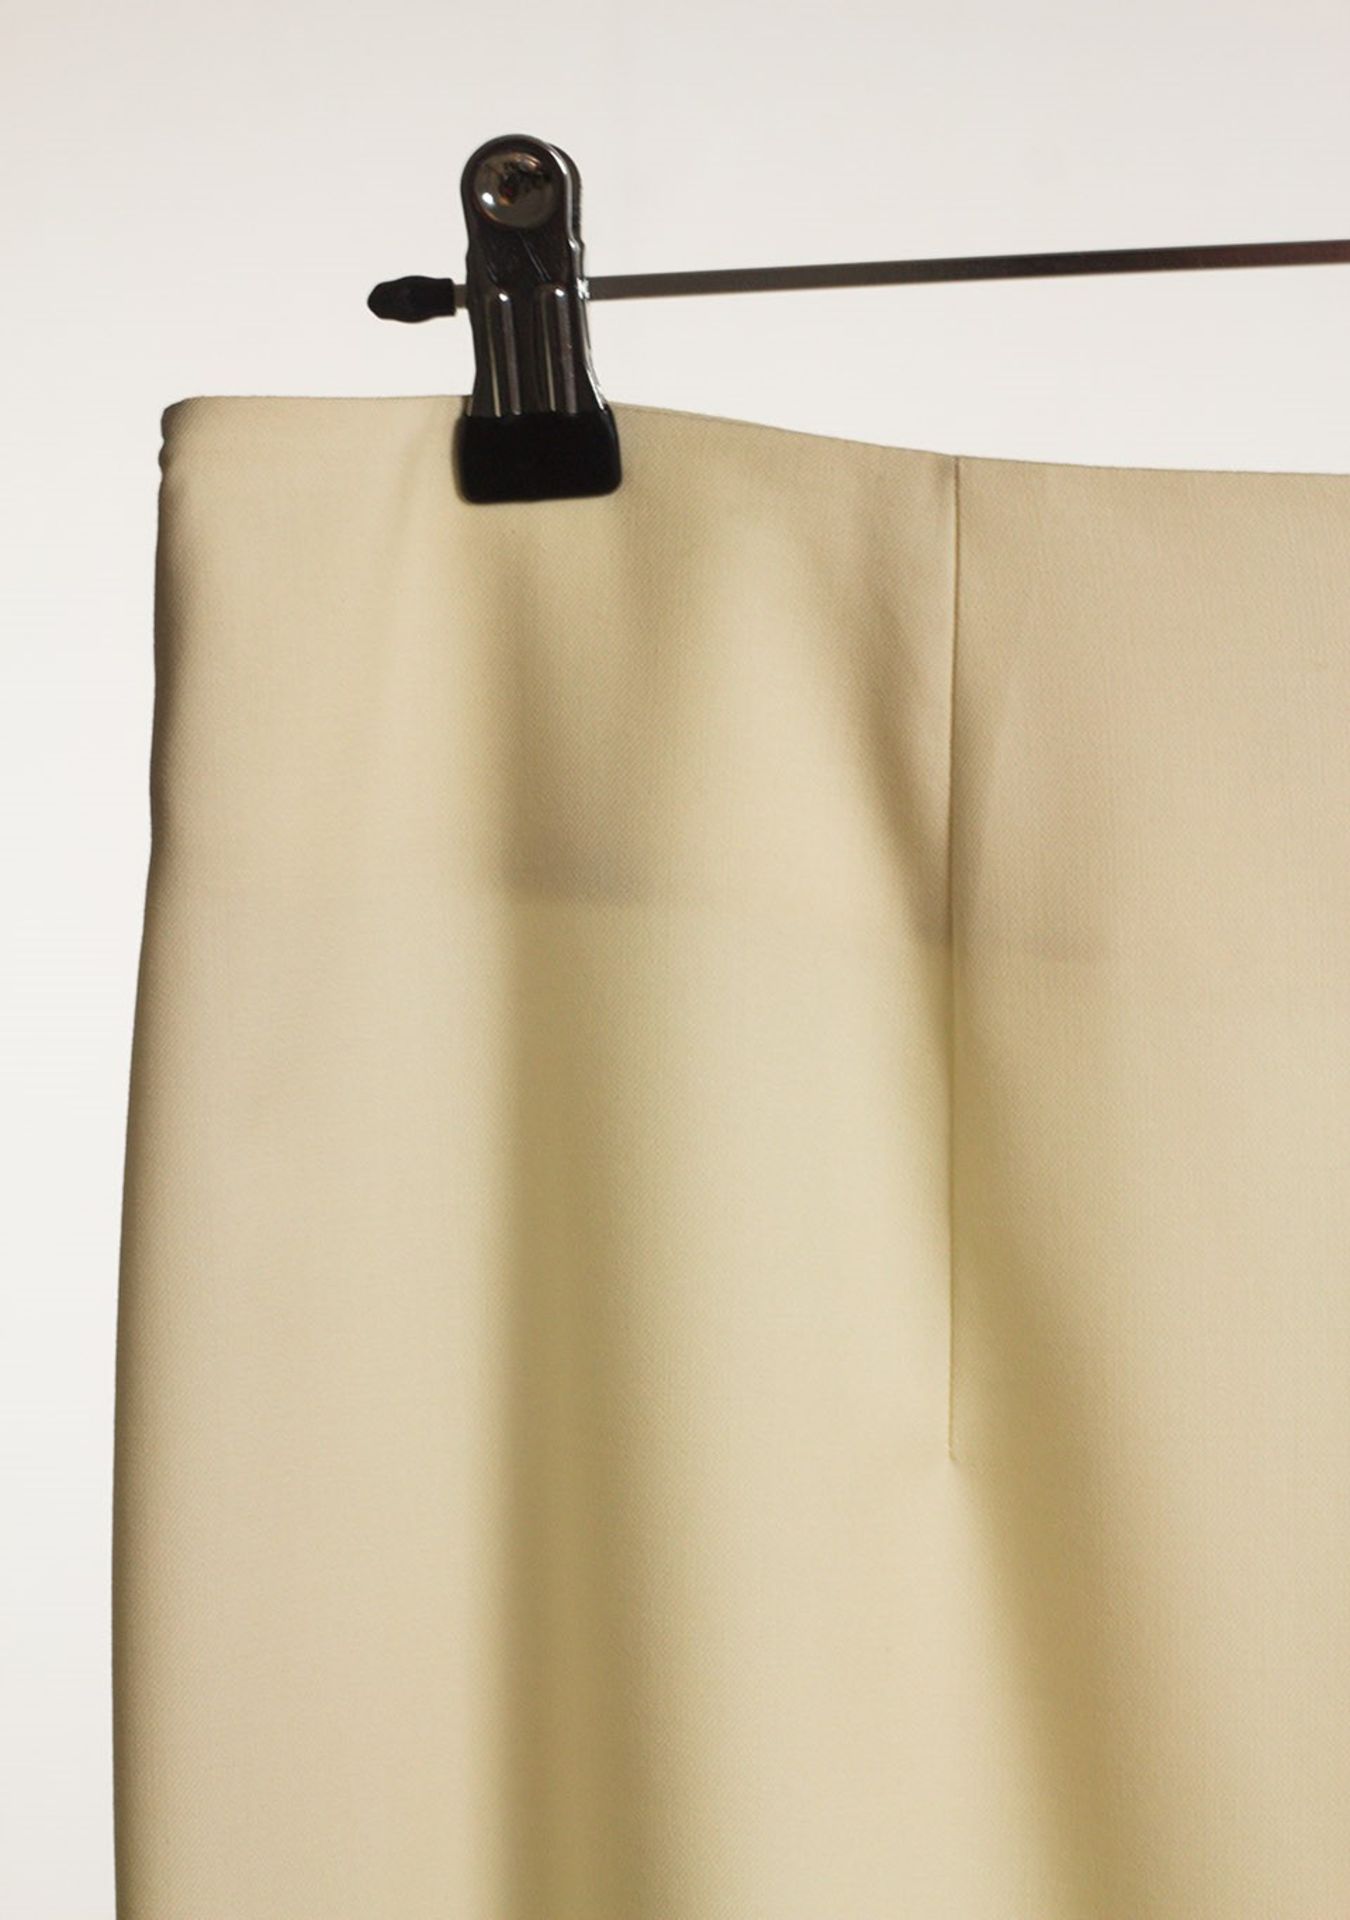 1 x Boutique Le Duc Cream Skirt - Size: 22 - Material: 100% Wool - From a High End Clothing Boutique - Image 2 of 10